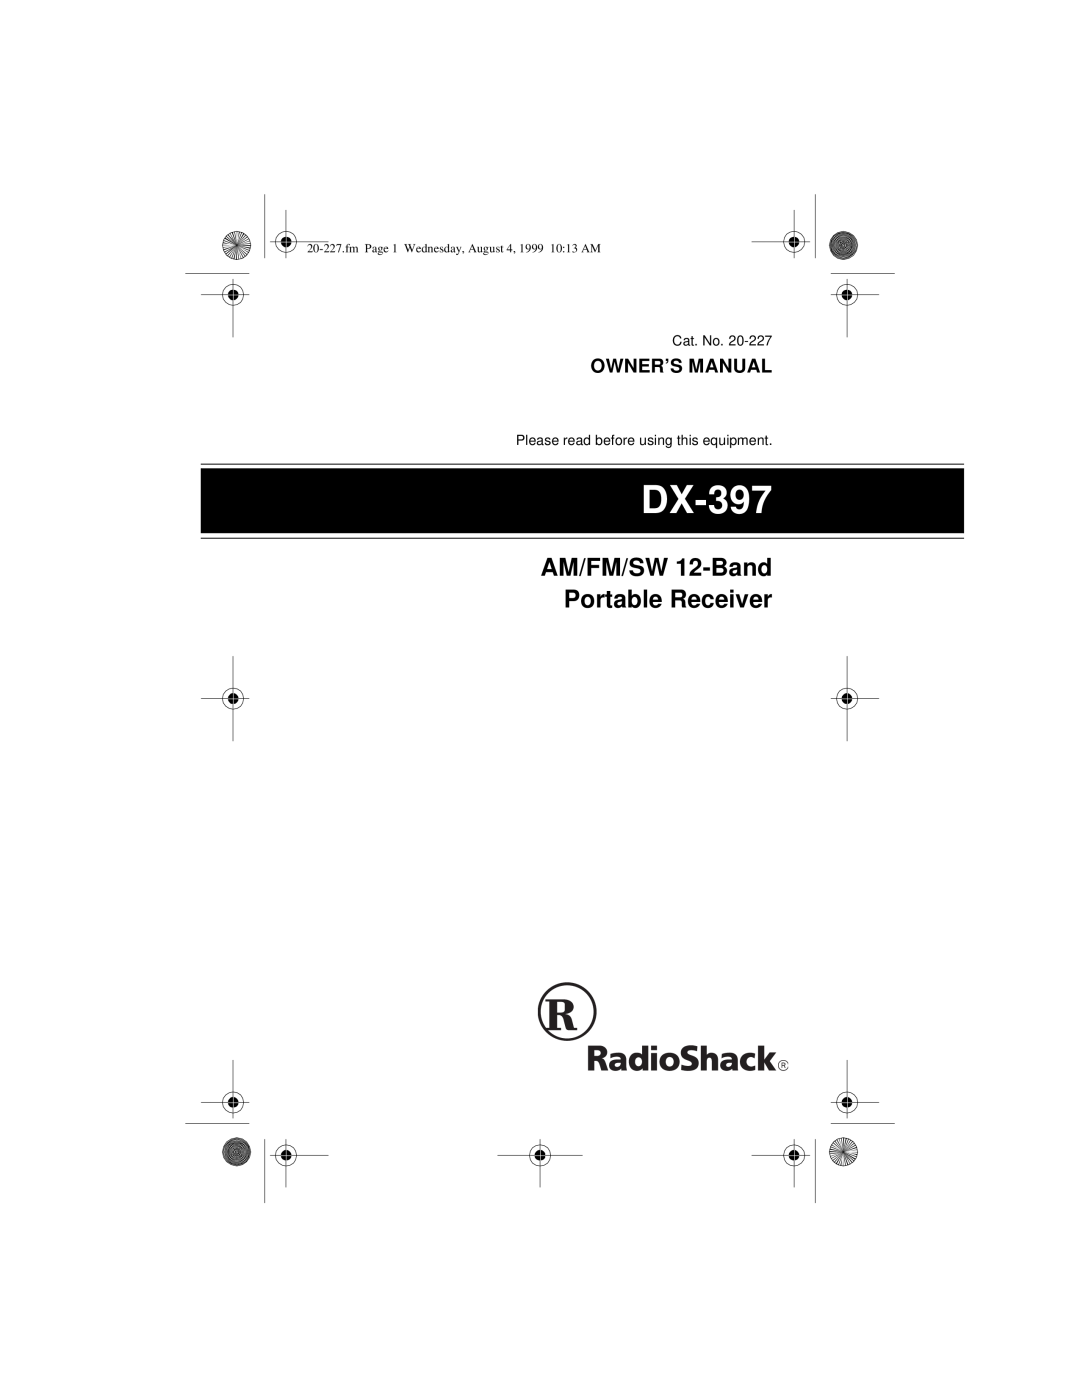 Radio Shack DX-397 owner manual AM/FM/SW 12-Band Portable Receiver 